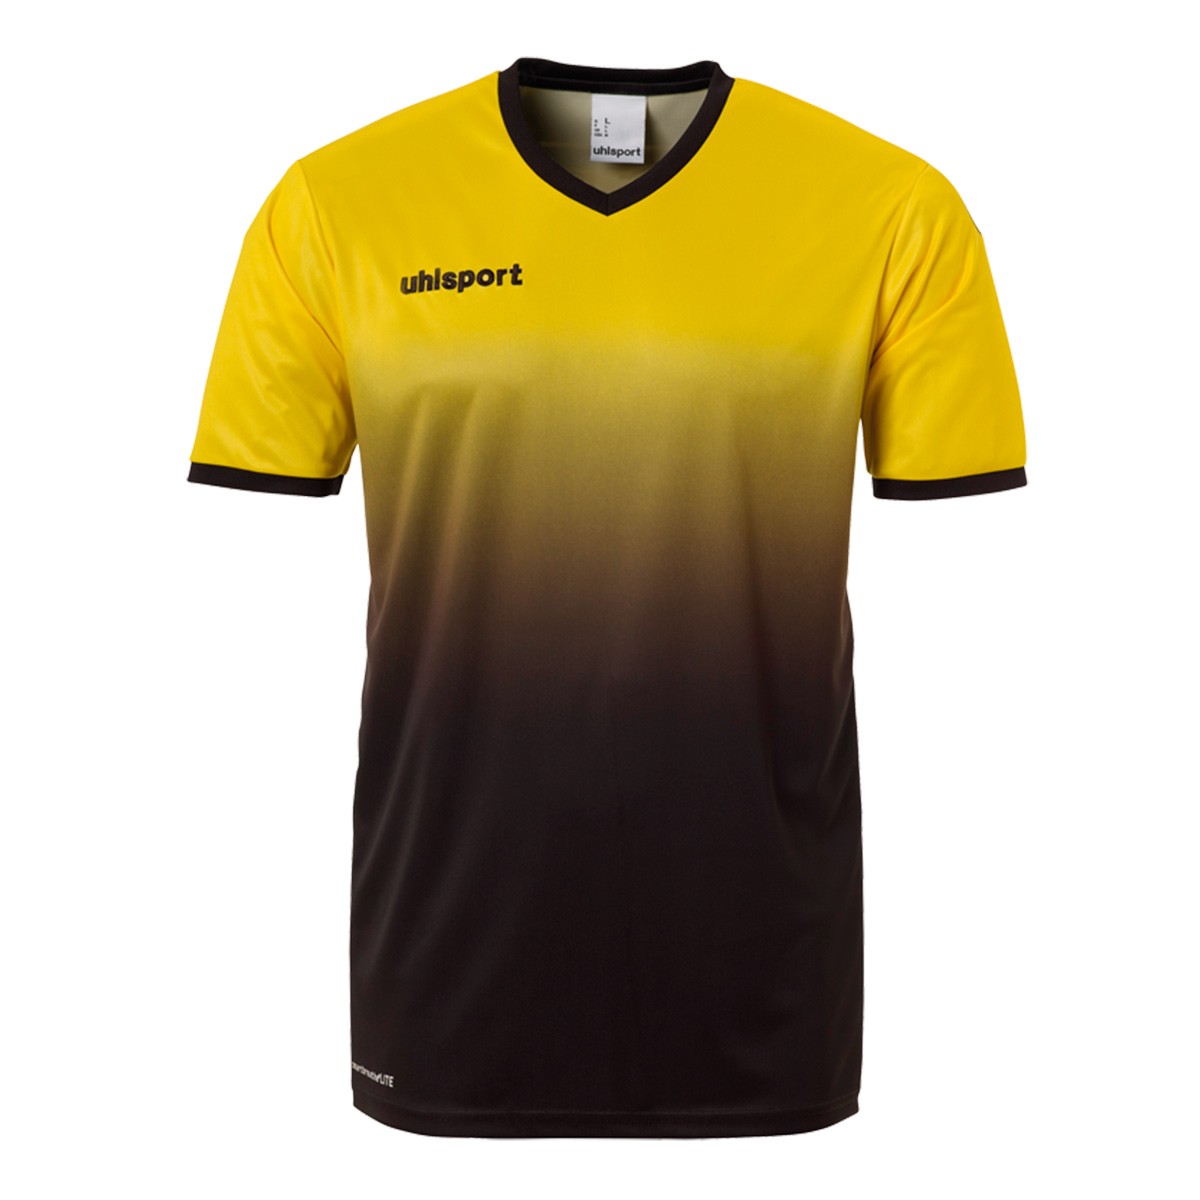 jersey yellow and black